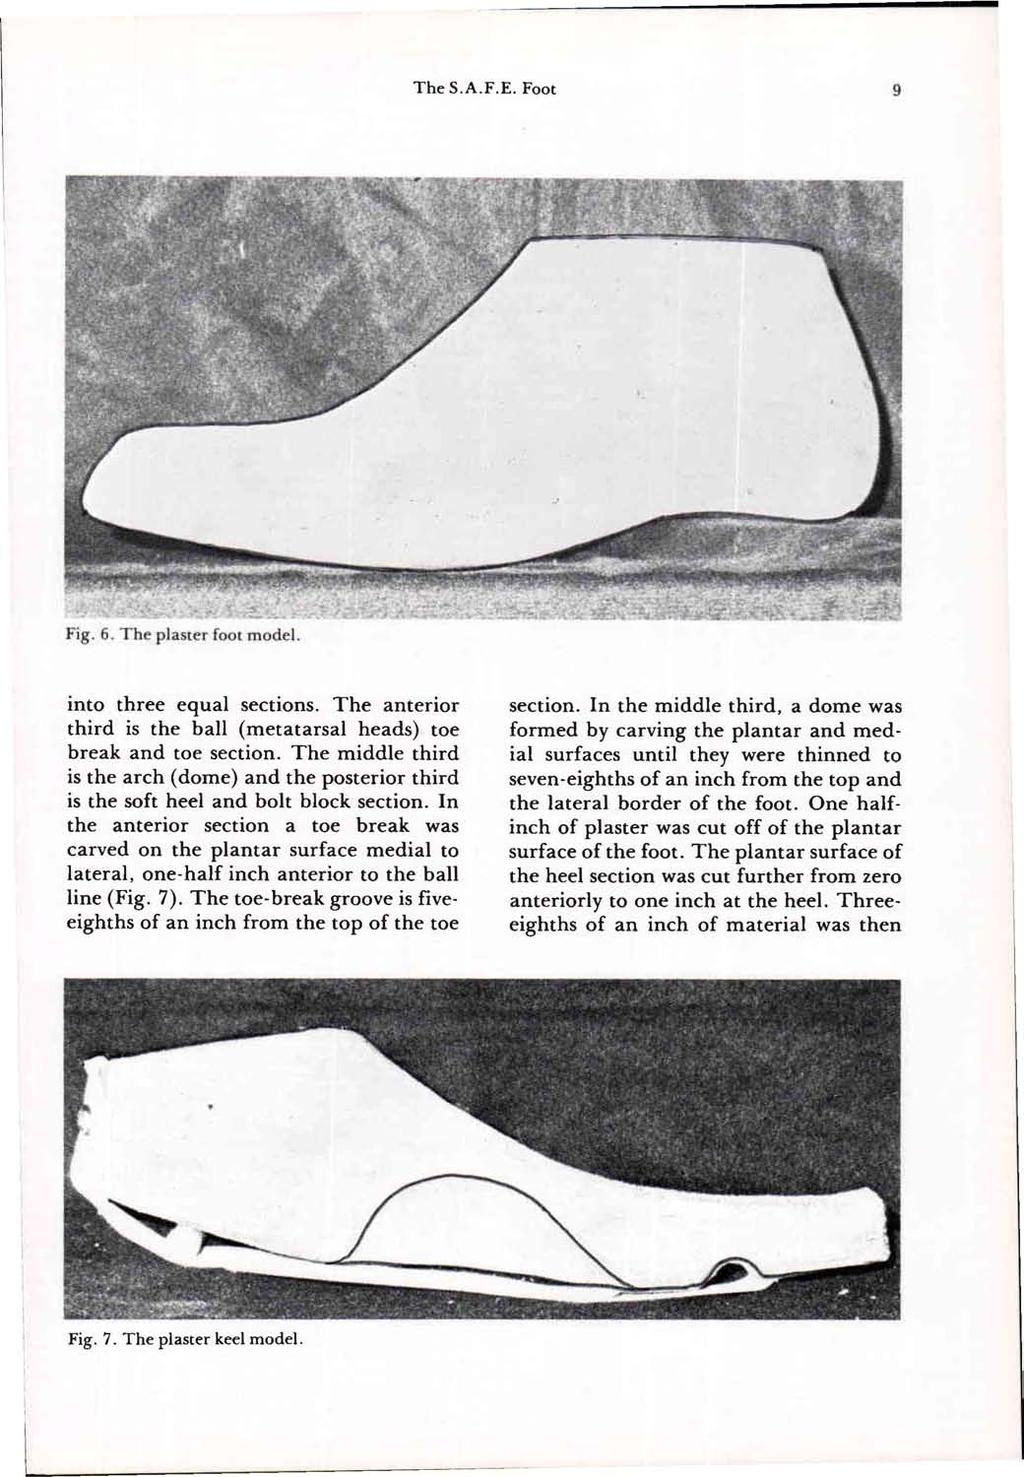 Fig. 6. The plaster foot model. into three equal sections. The anterior third is the ball (metatarsal heads) toe break and toe section.